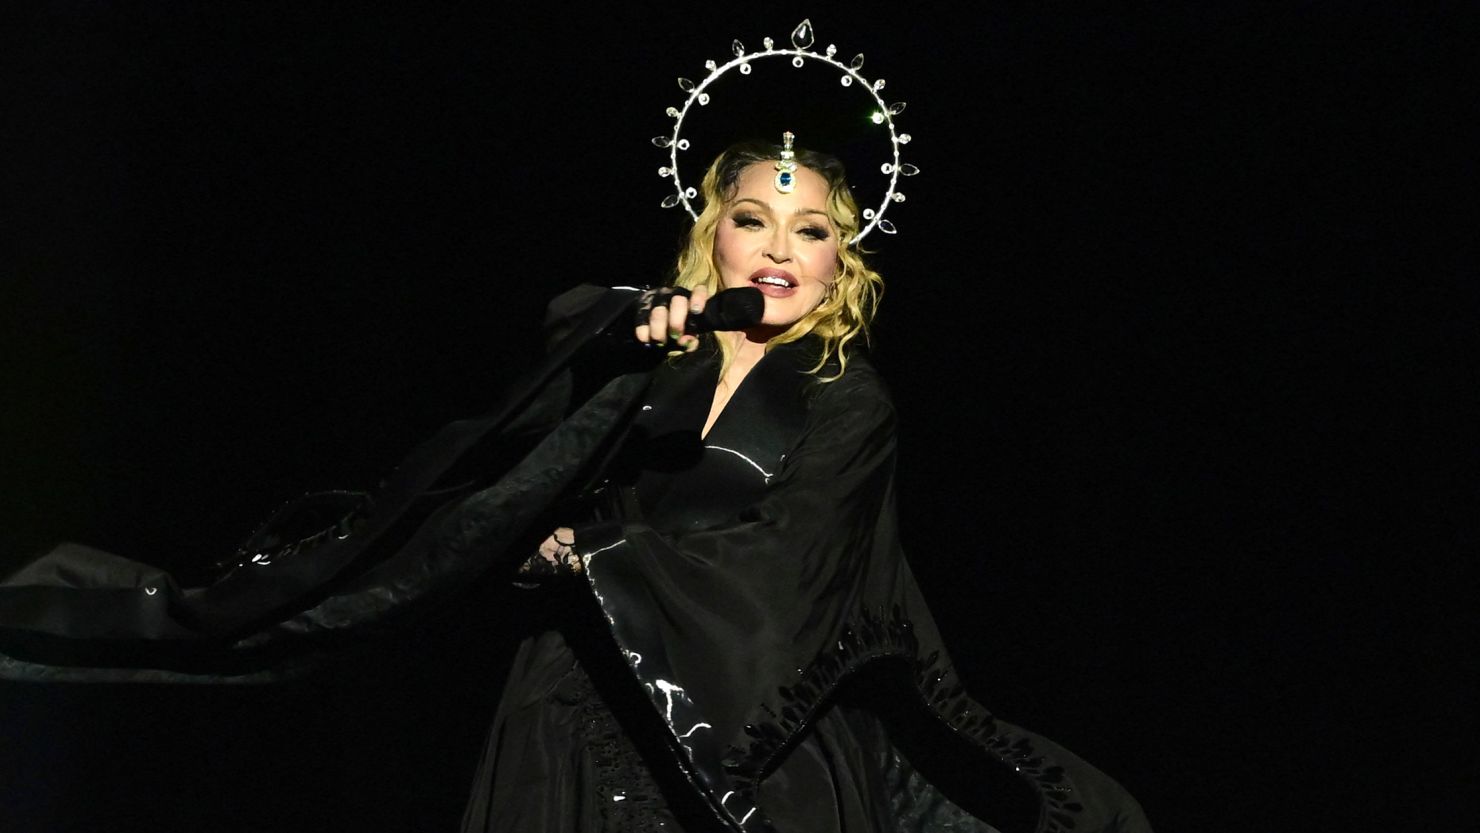 Madonna's performance at Copacabana beach in Rio de Janeiro, Brazil, was estimated to have been attended by 1.6 million people.